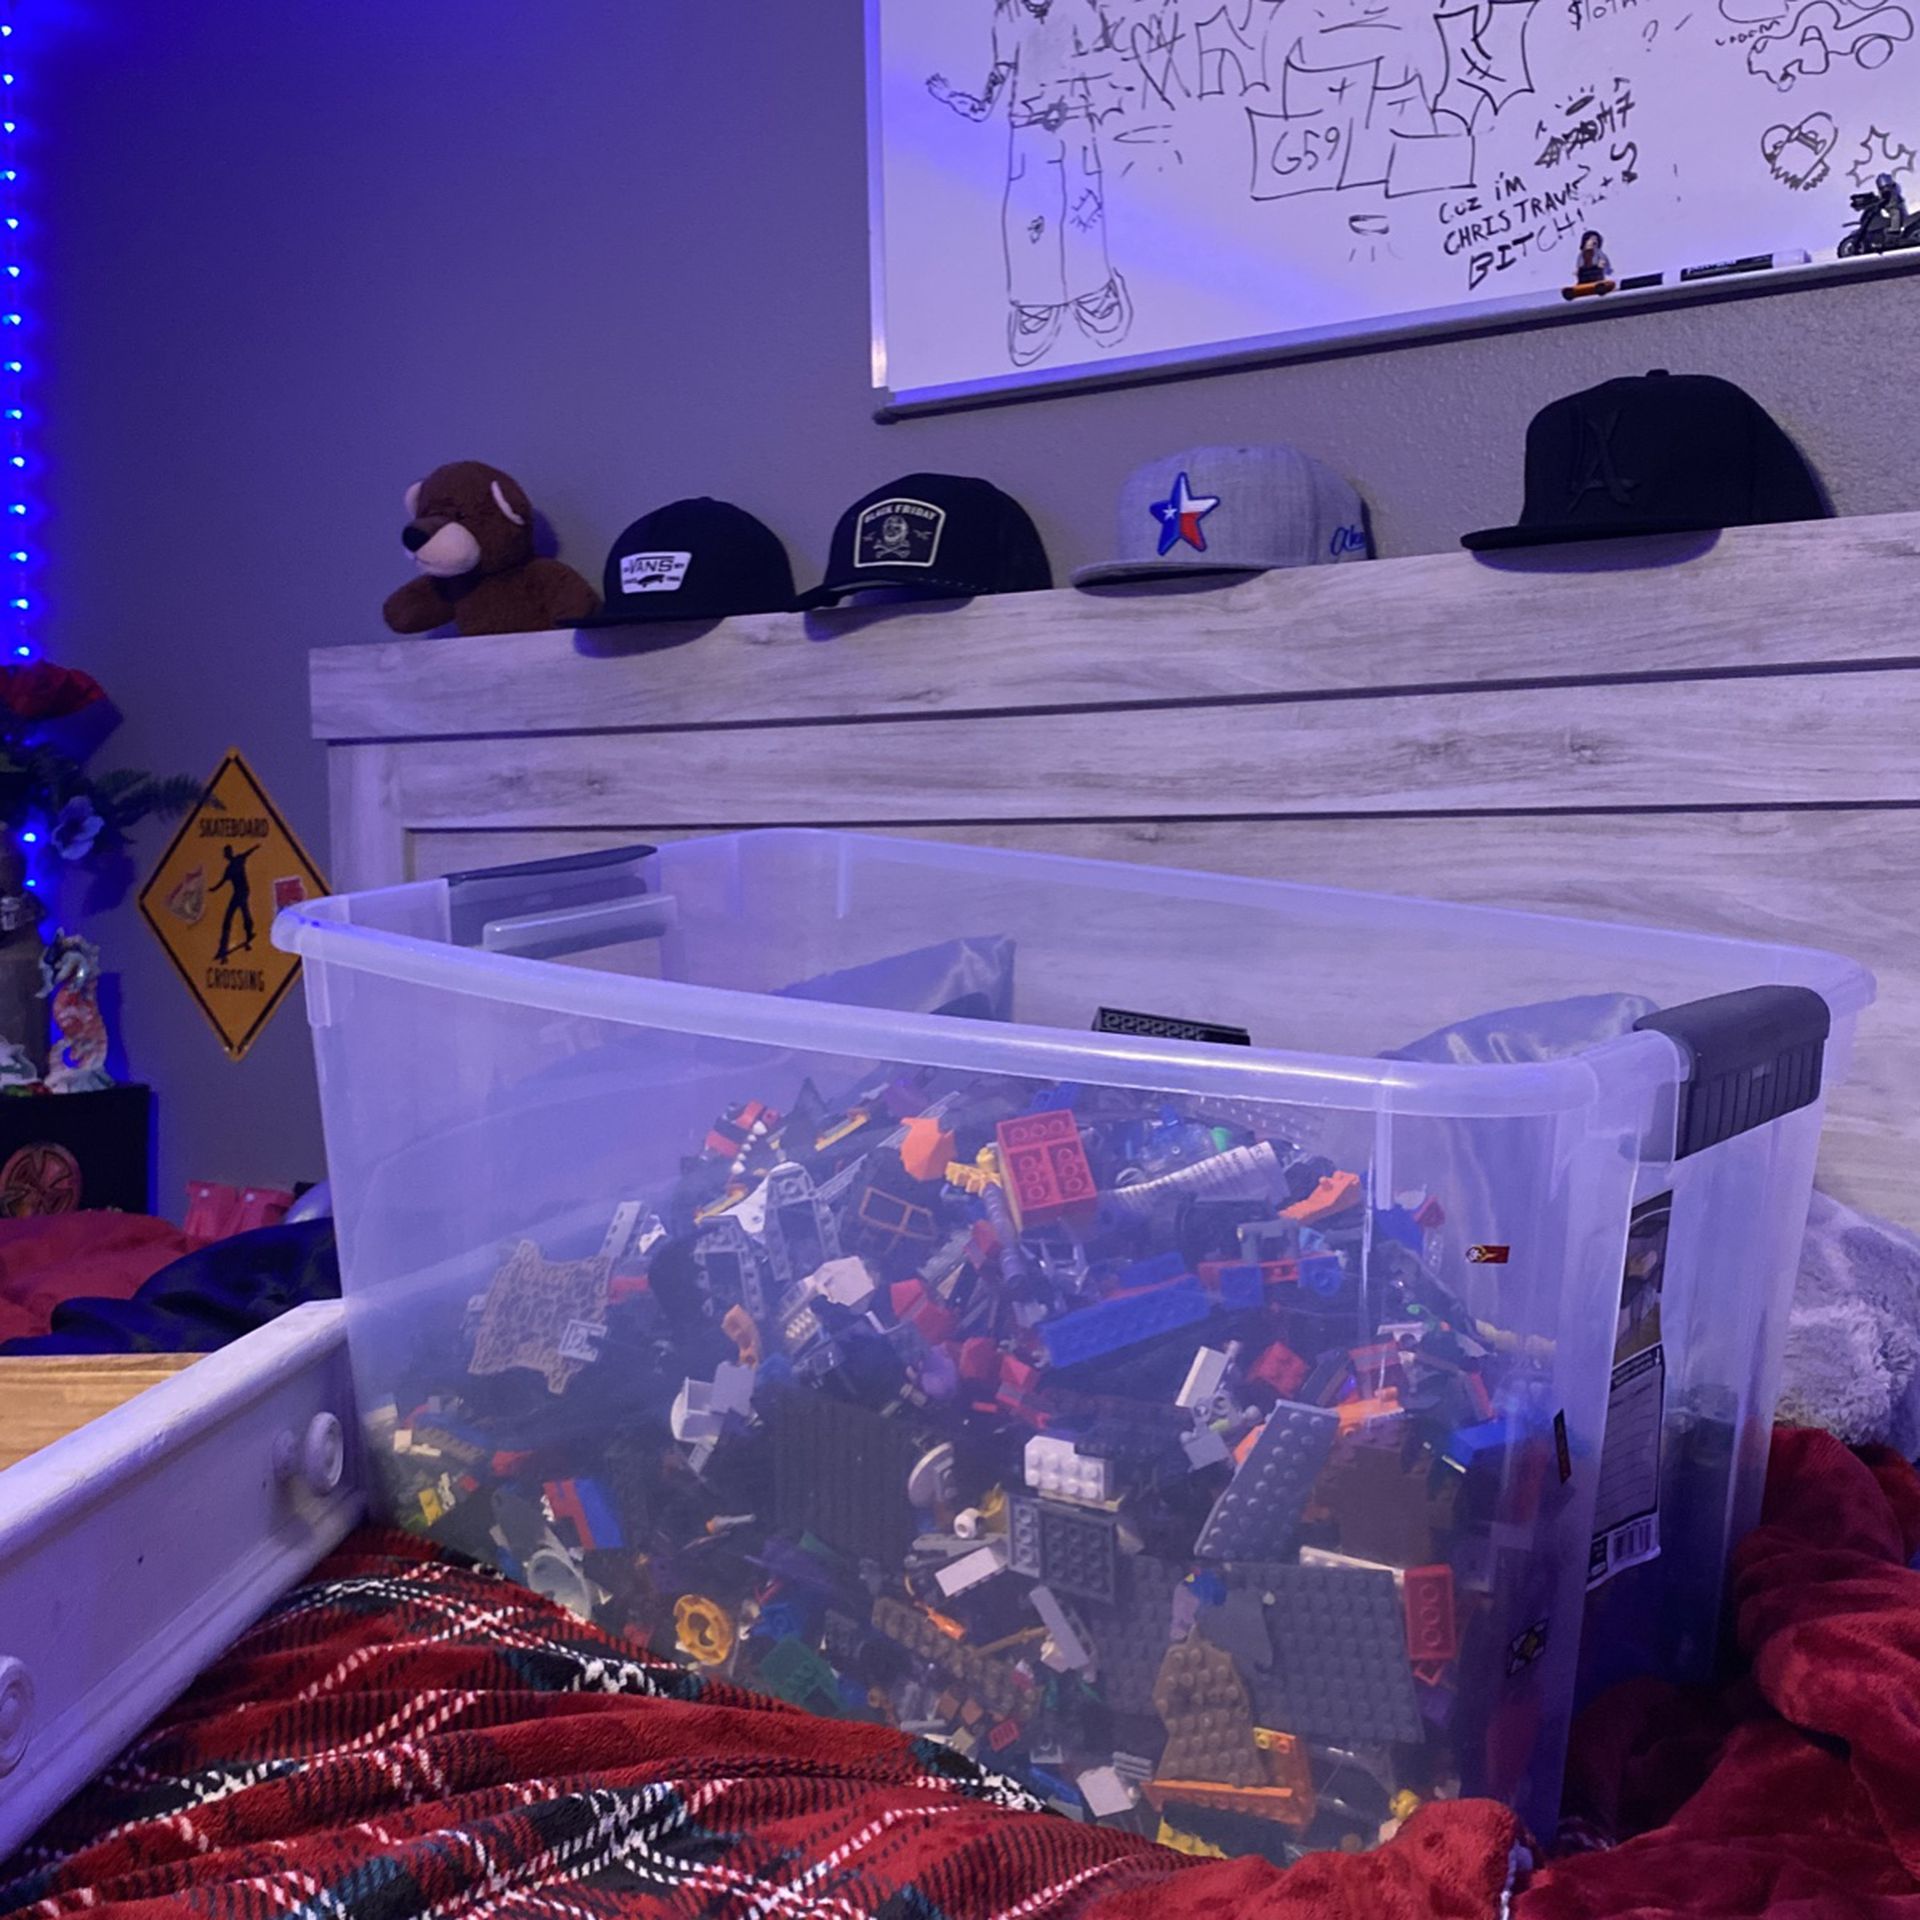 Large tub full of legos over 400$+ in value